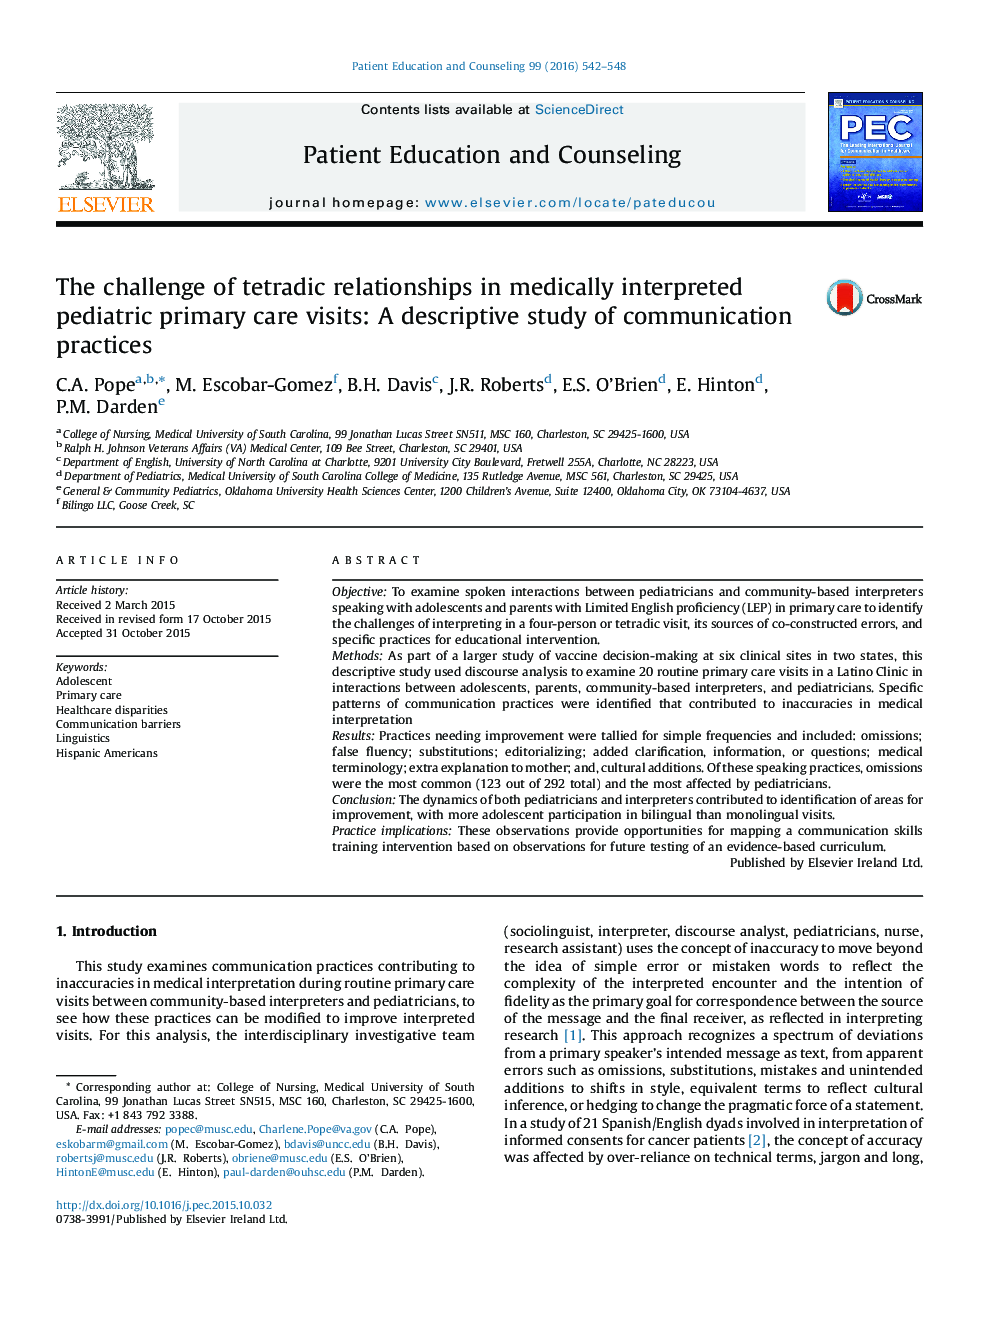 The challenge of tetradic relationships in medically interpreted pediatric primary care visits: A descriptive study of communication practices